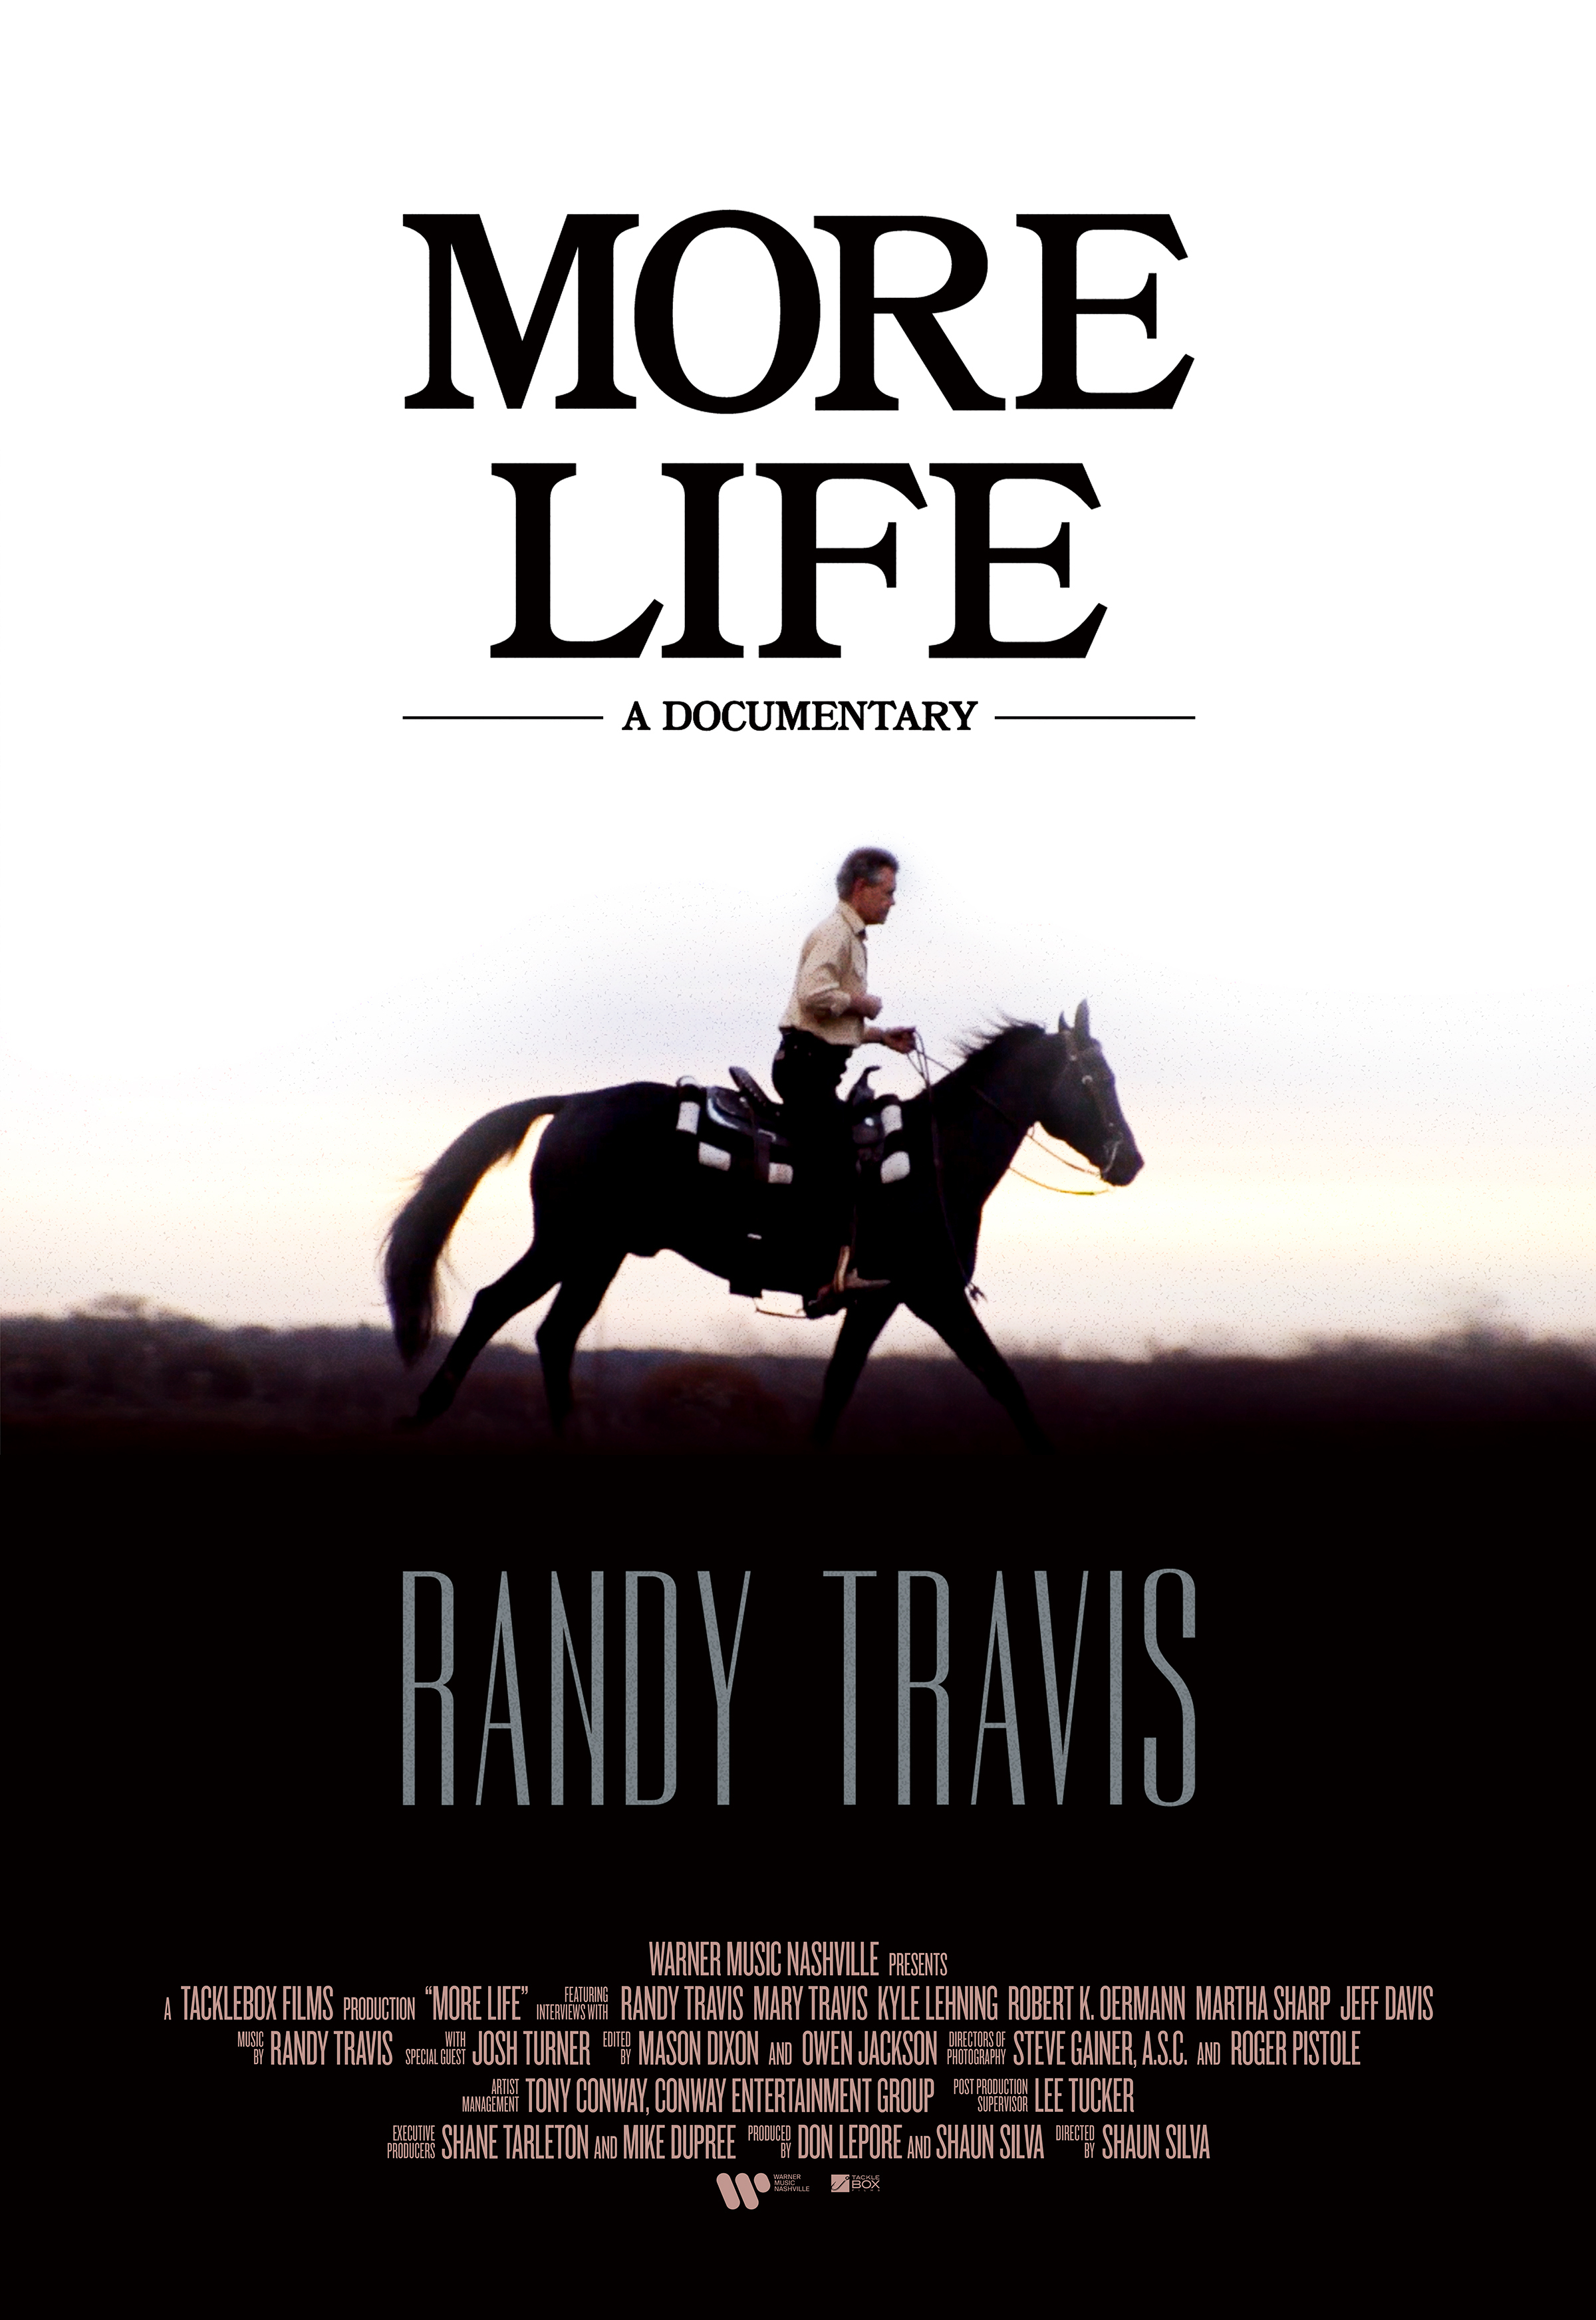 Randy Travis Documentary "More Life" Set to Premiere on Feb. 10